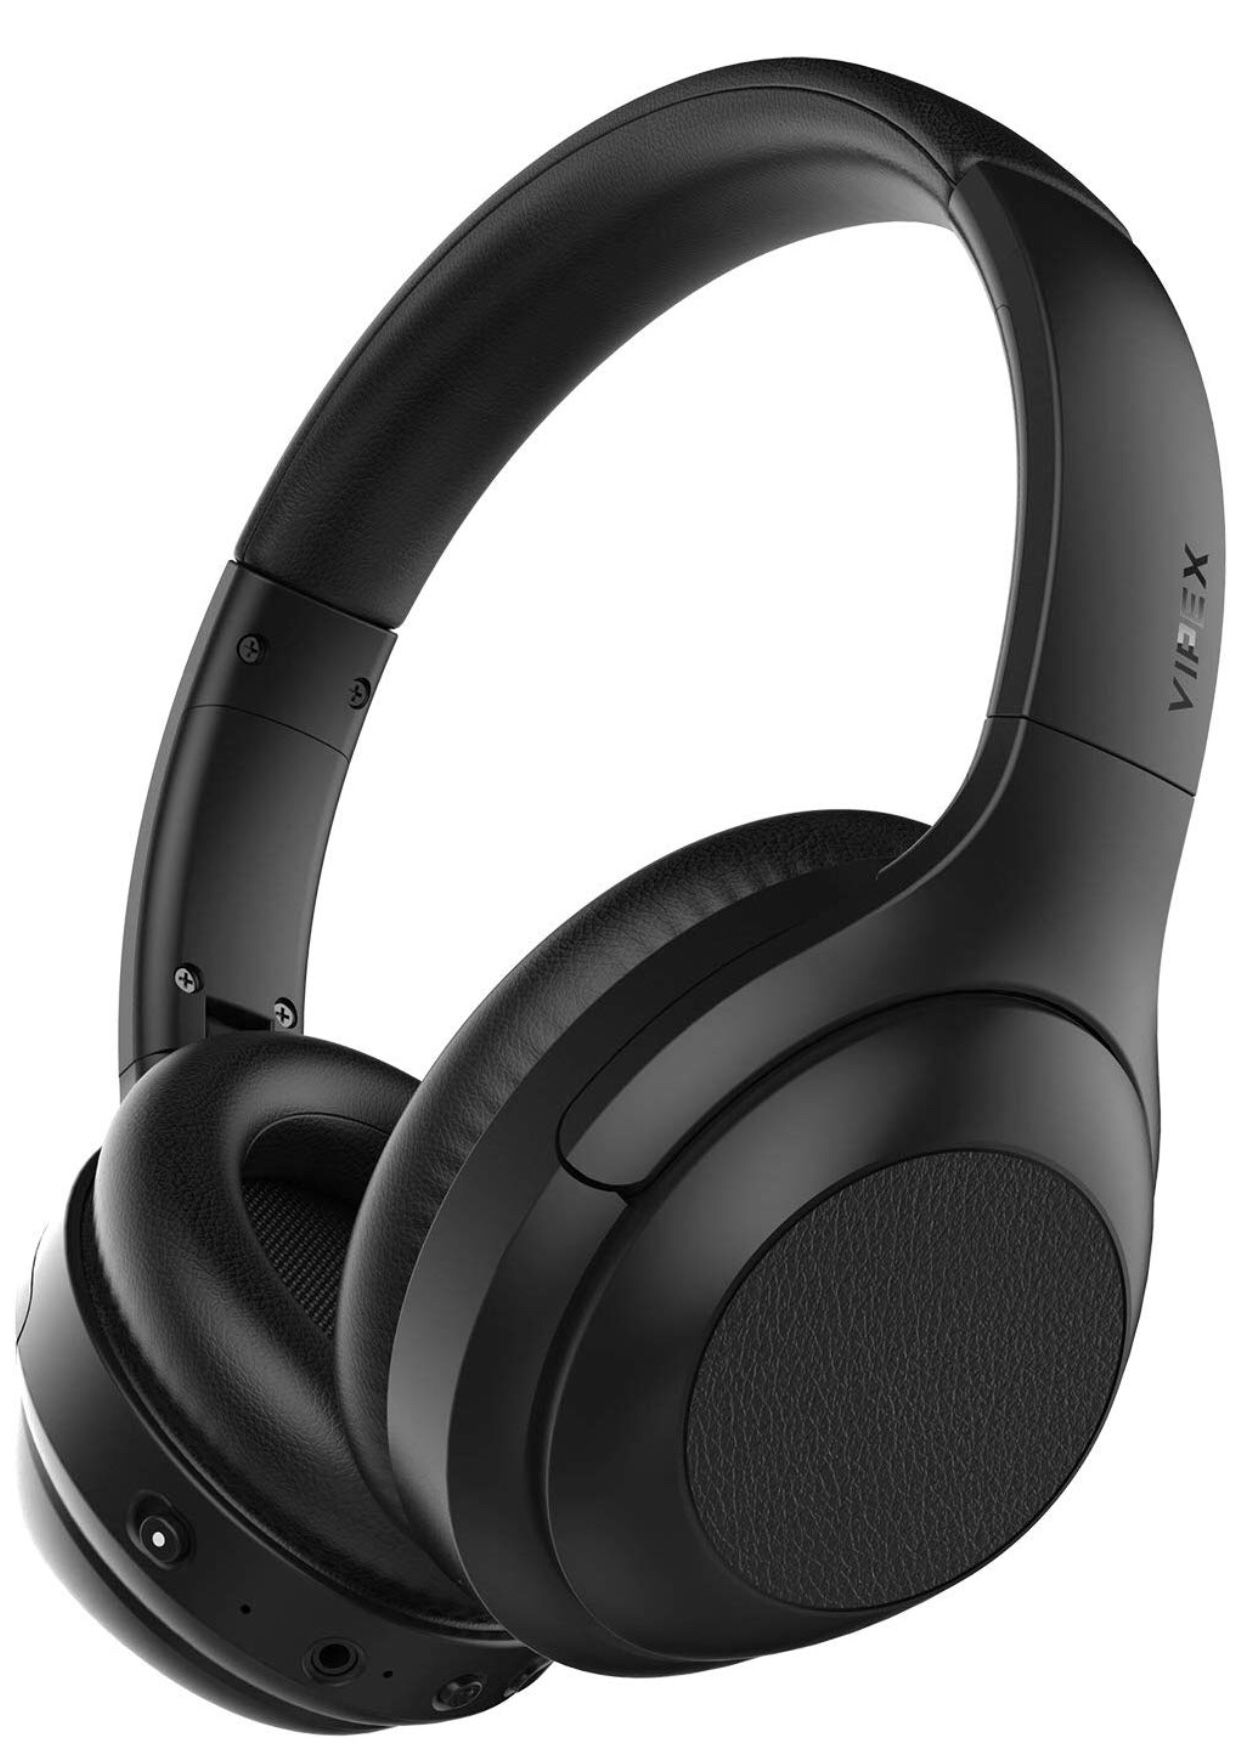 Active Noise Cancelling Headphones, Bluetooth Wireless Headphone Over Ear Headphones with Mic, Hi-Fi Sound Deep Bass, Quick Charge, Up to 30H Playtim